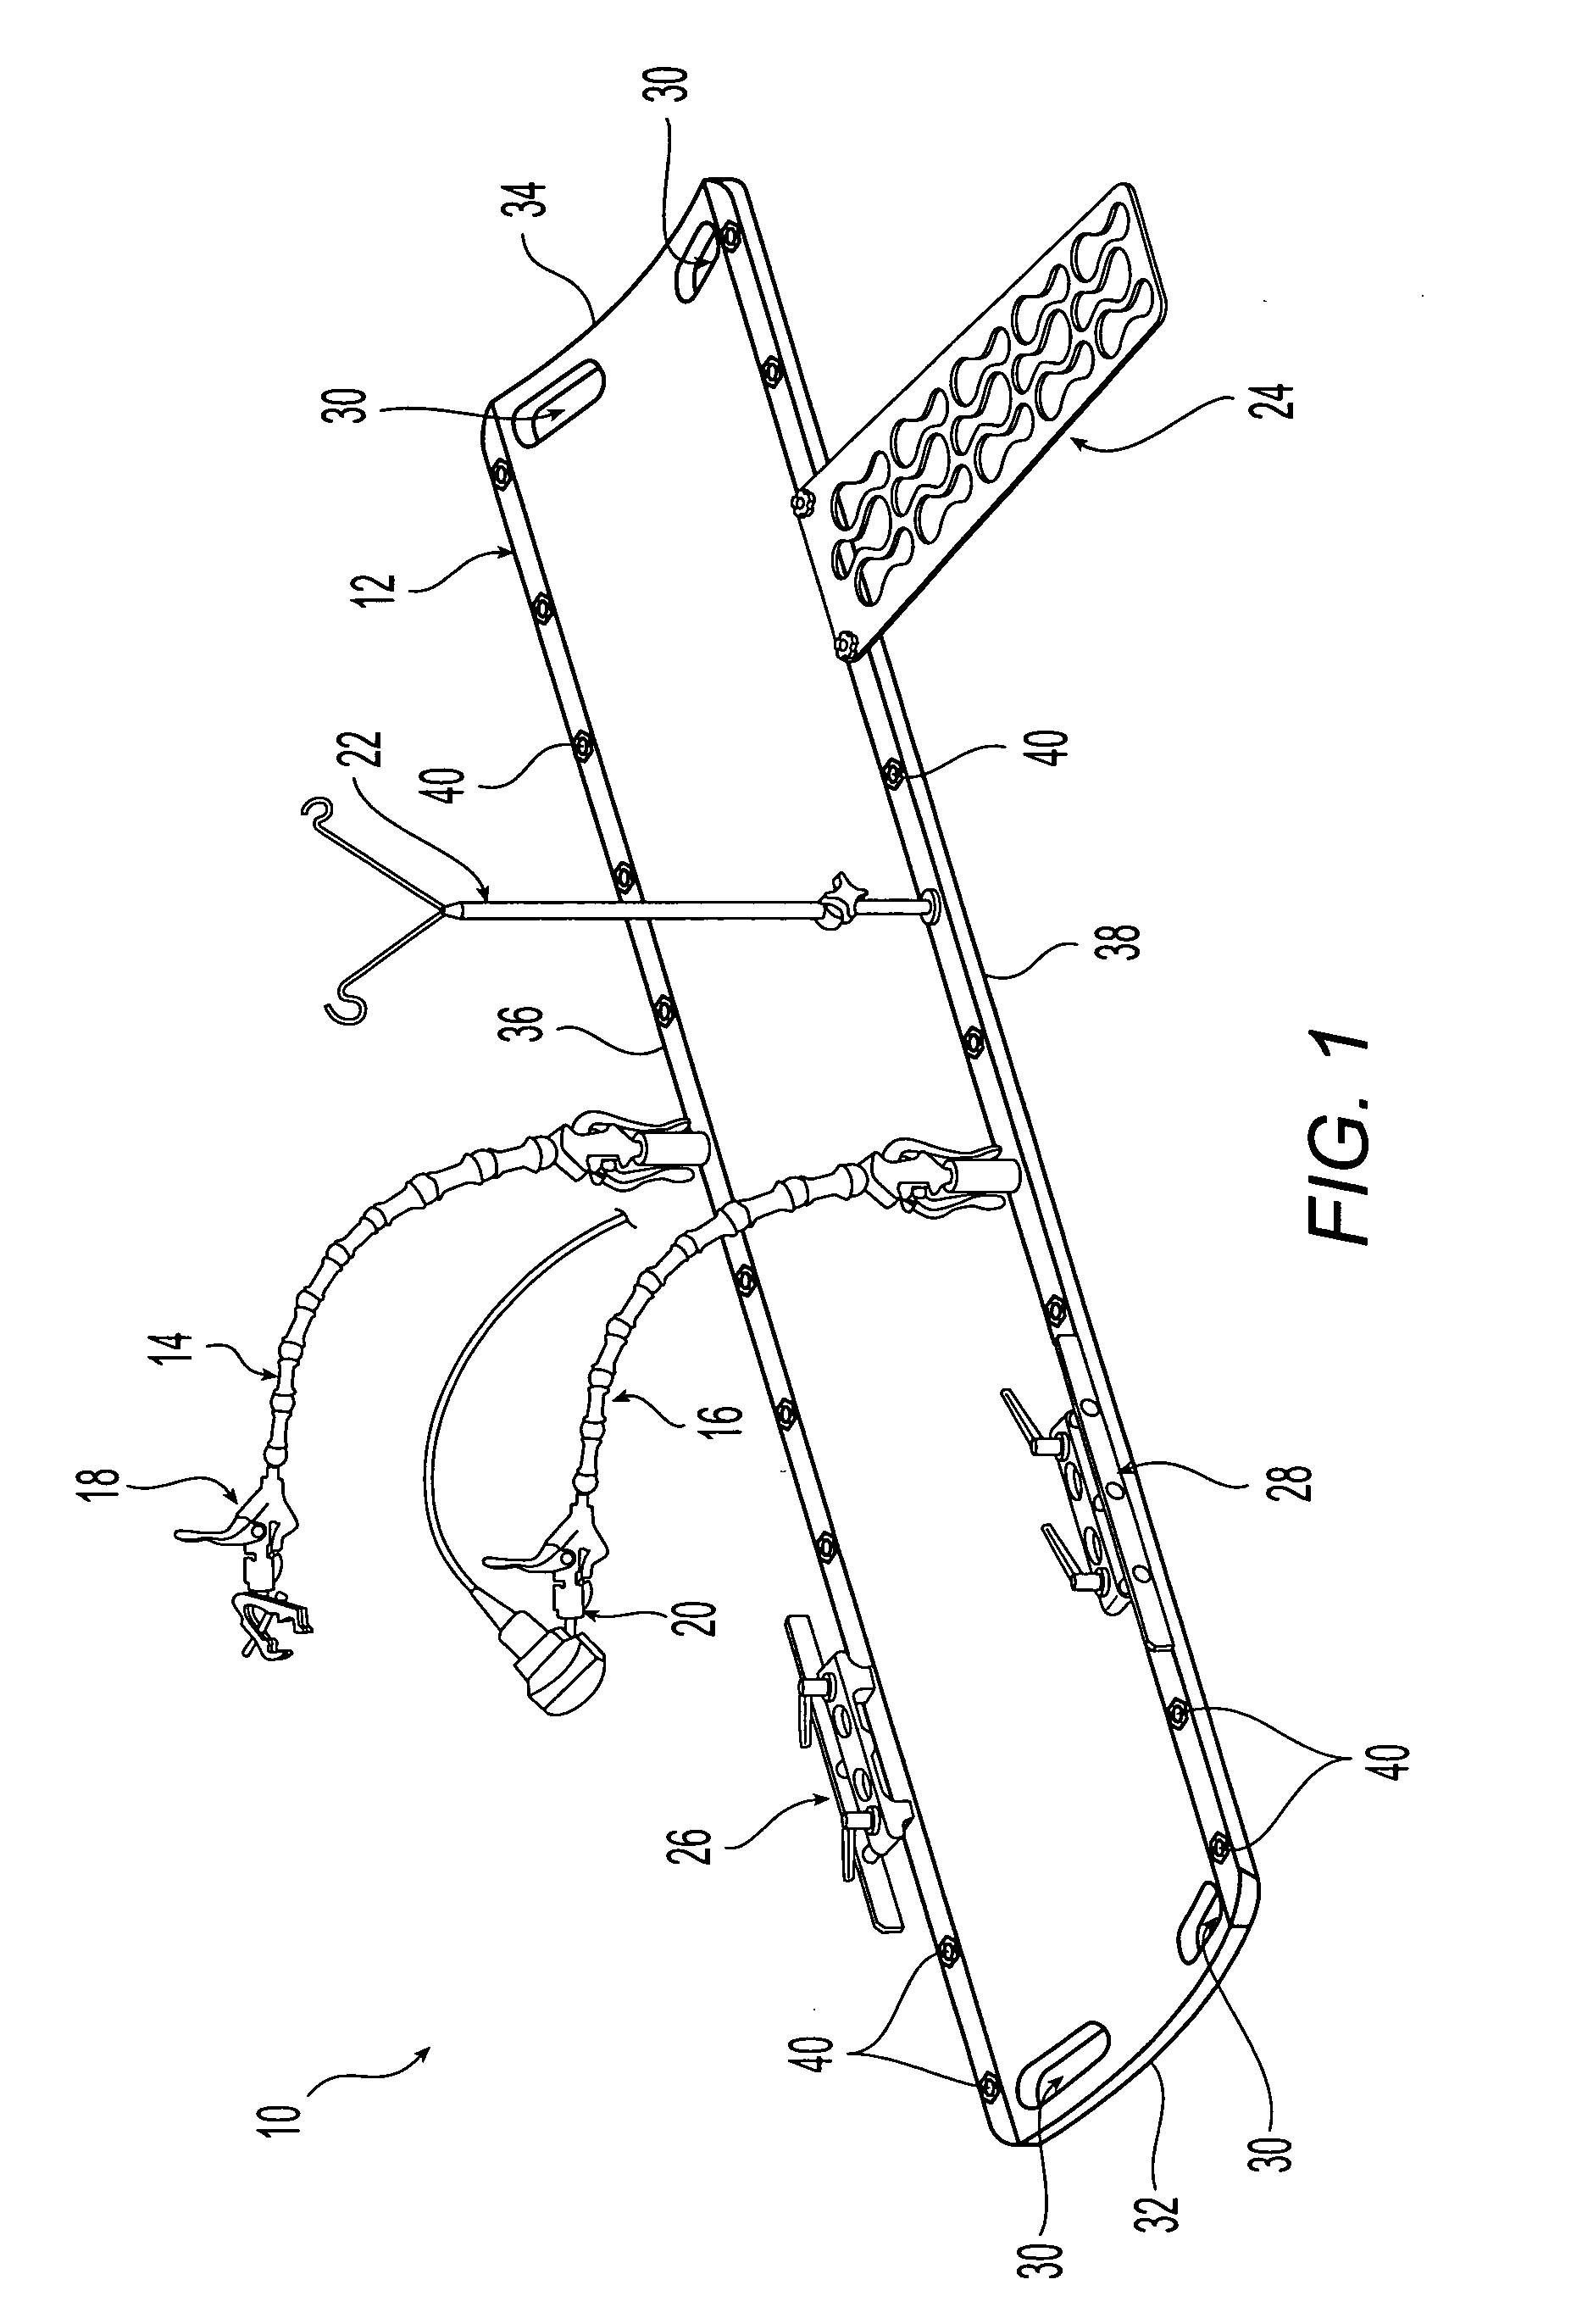 Support system for use when performing medical imaging of a patient